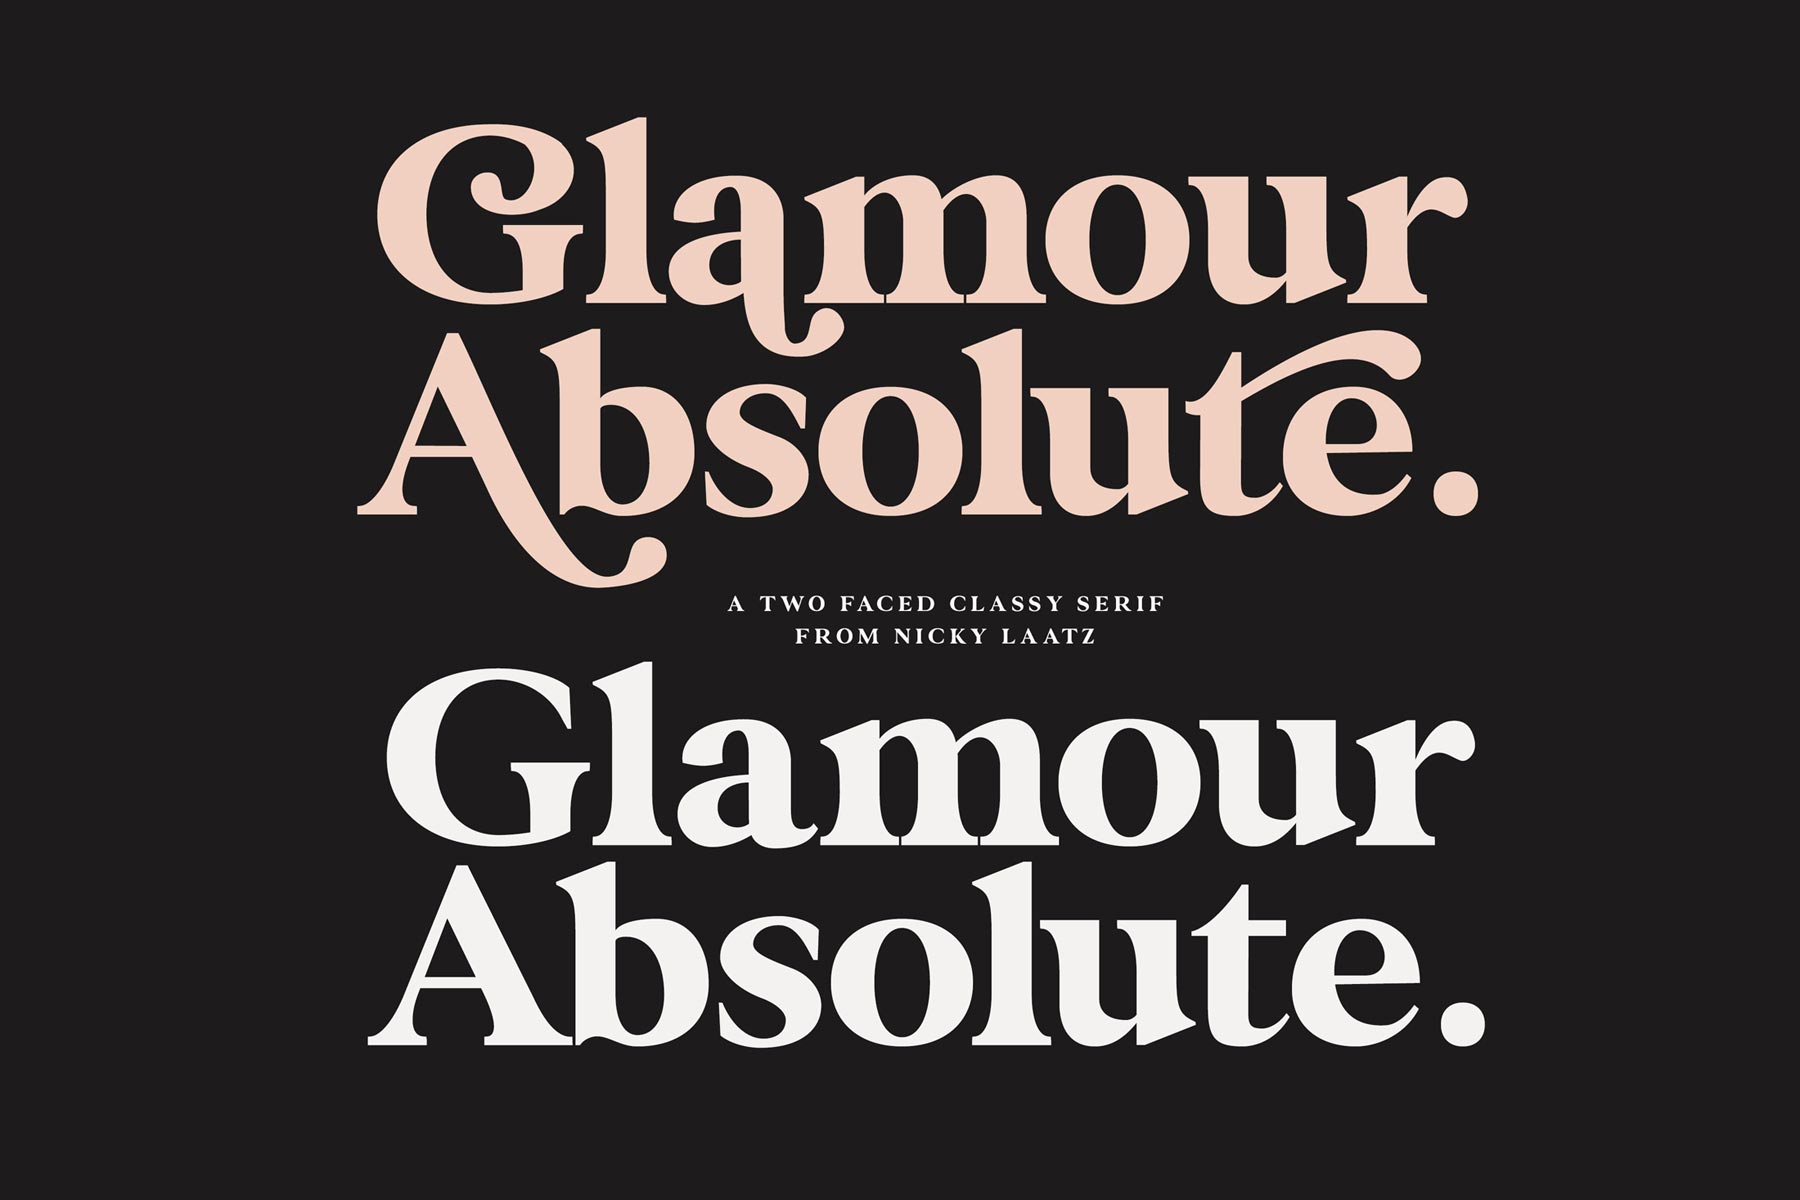 GLAMOUR ABSOLUTEの組見本1